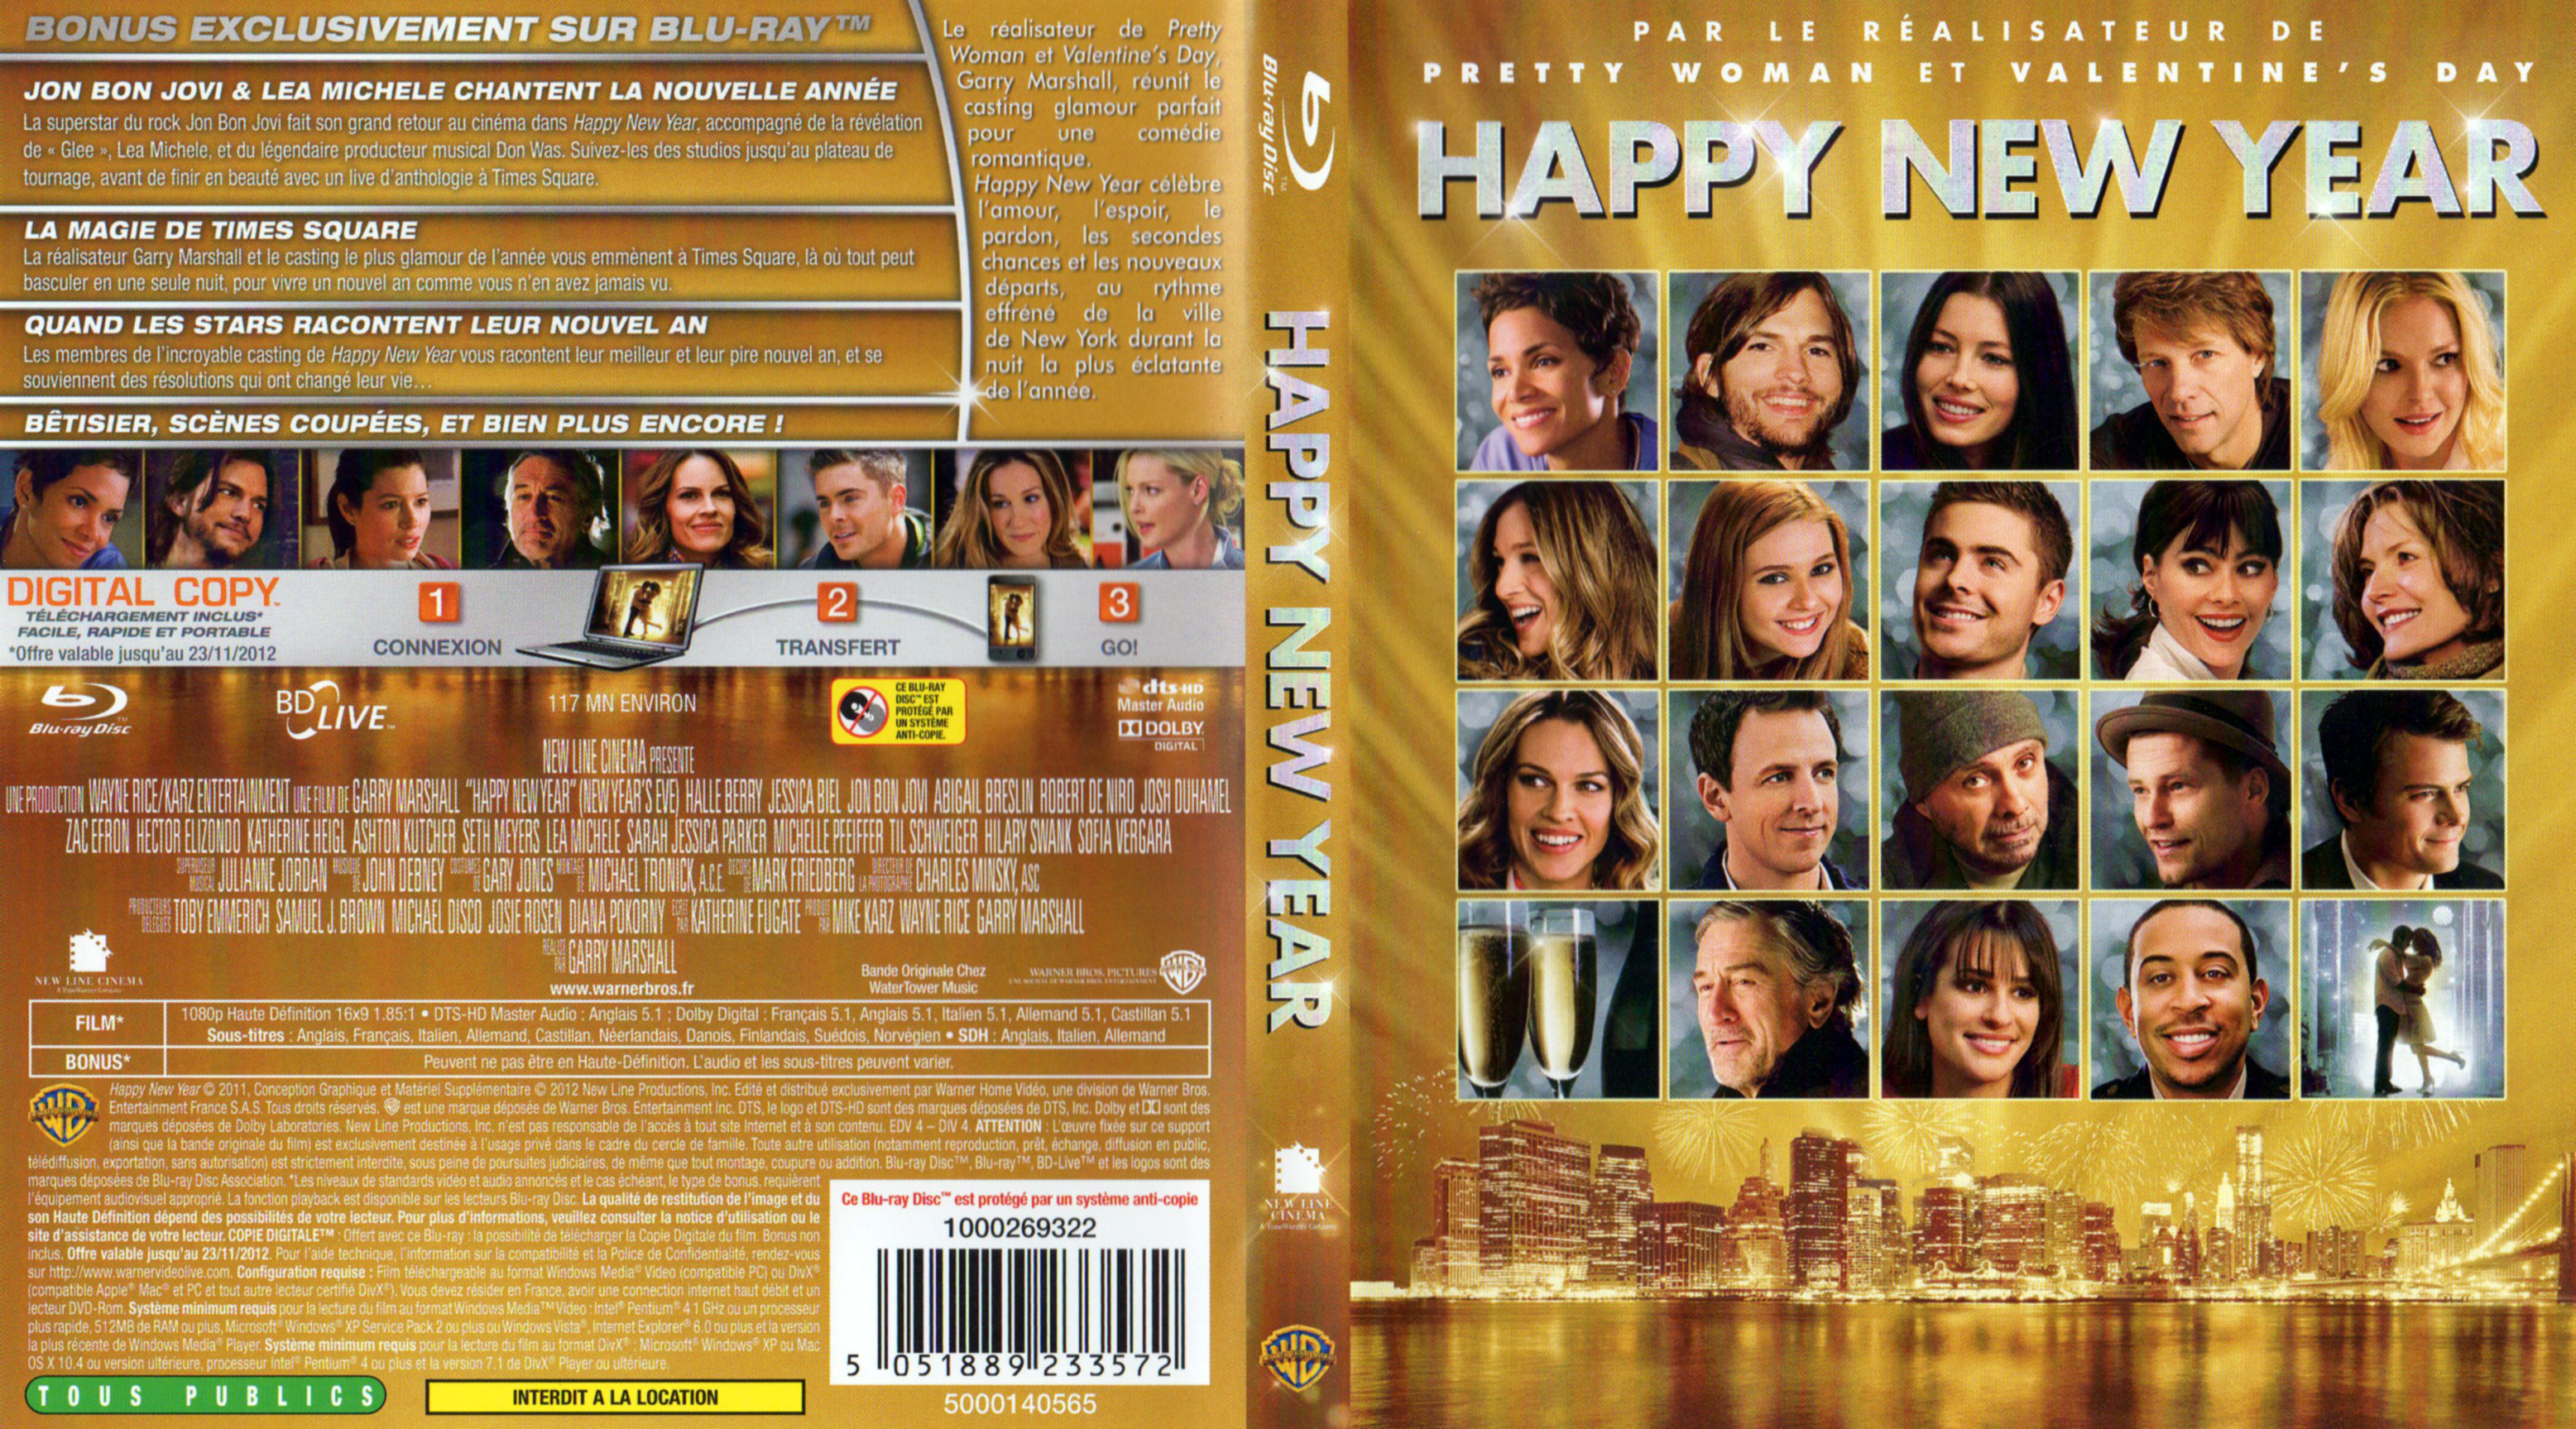 Jaquette DVD Happy new year (BLU-RAY)